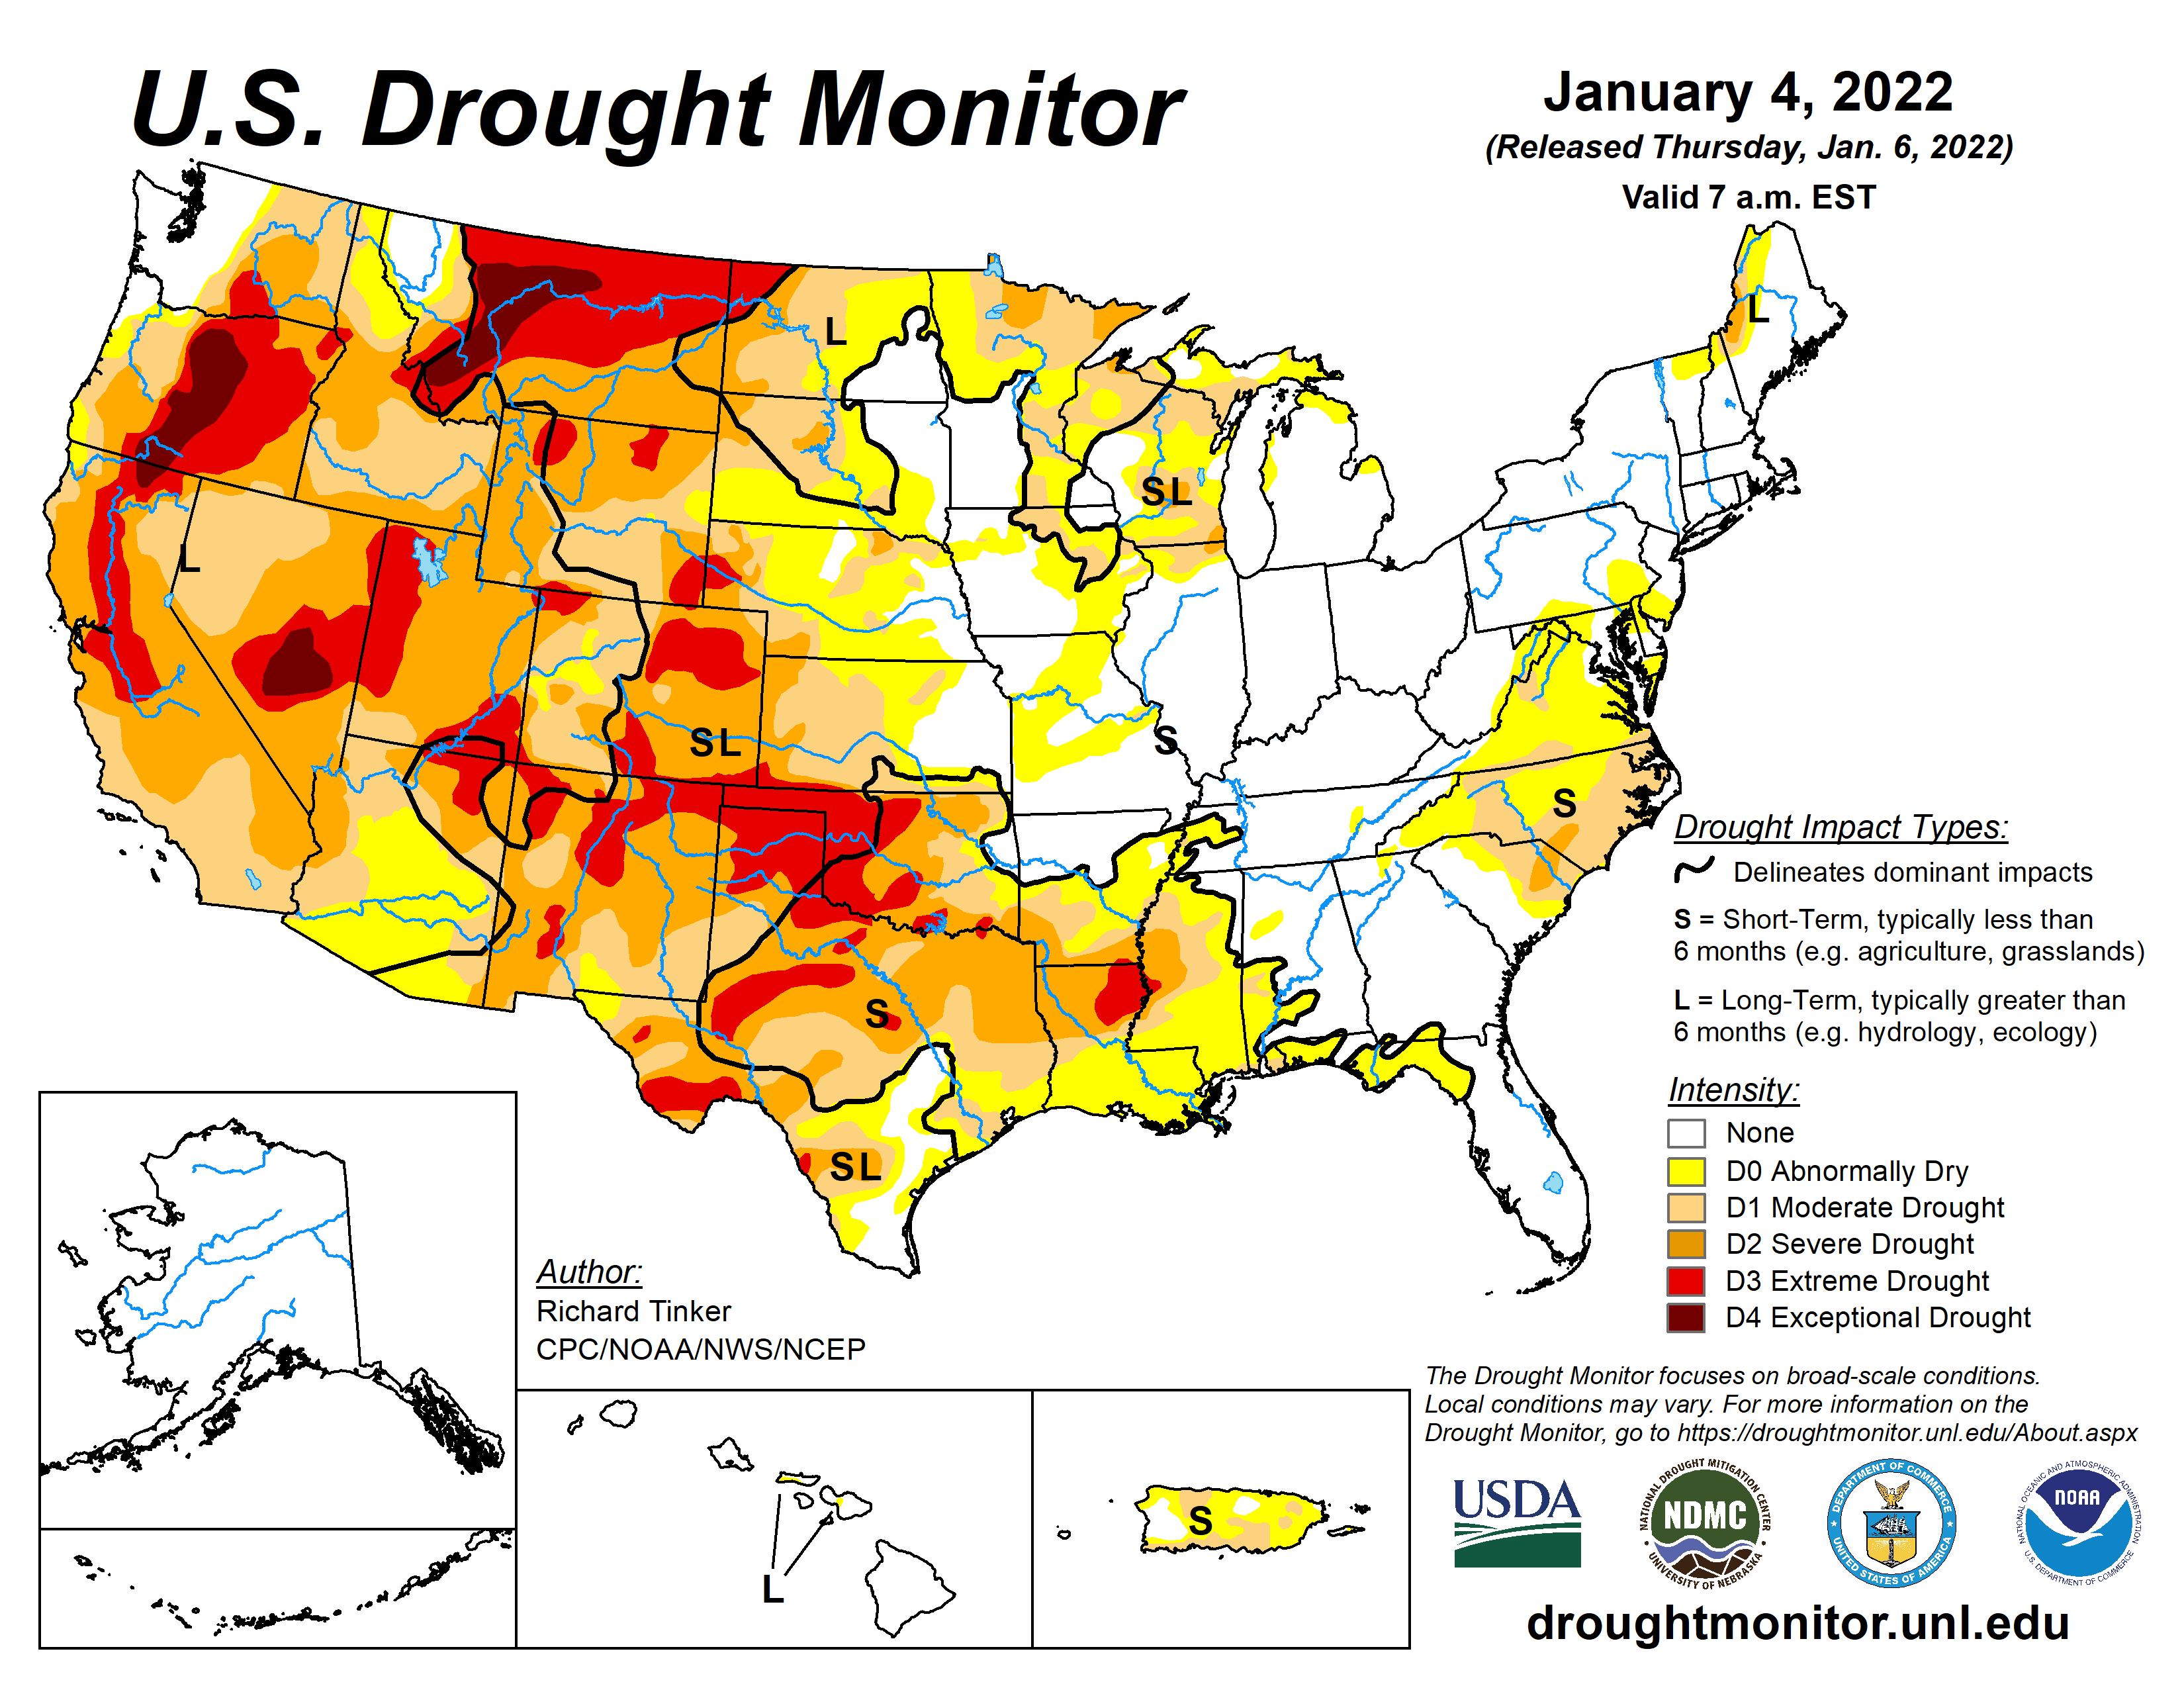 April 2021 Drought Report National Centers for Environmental